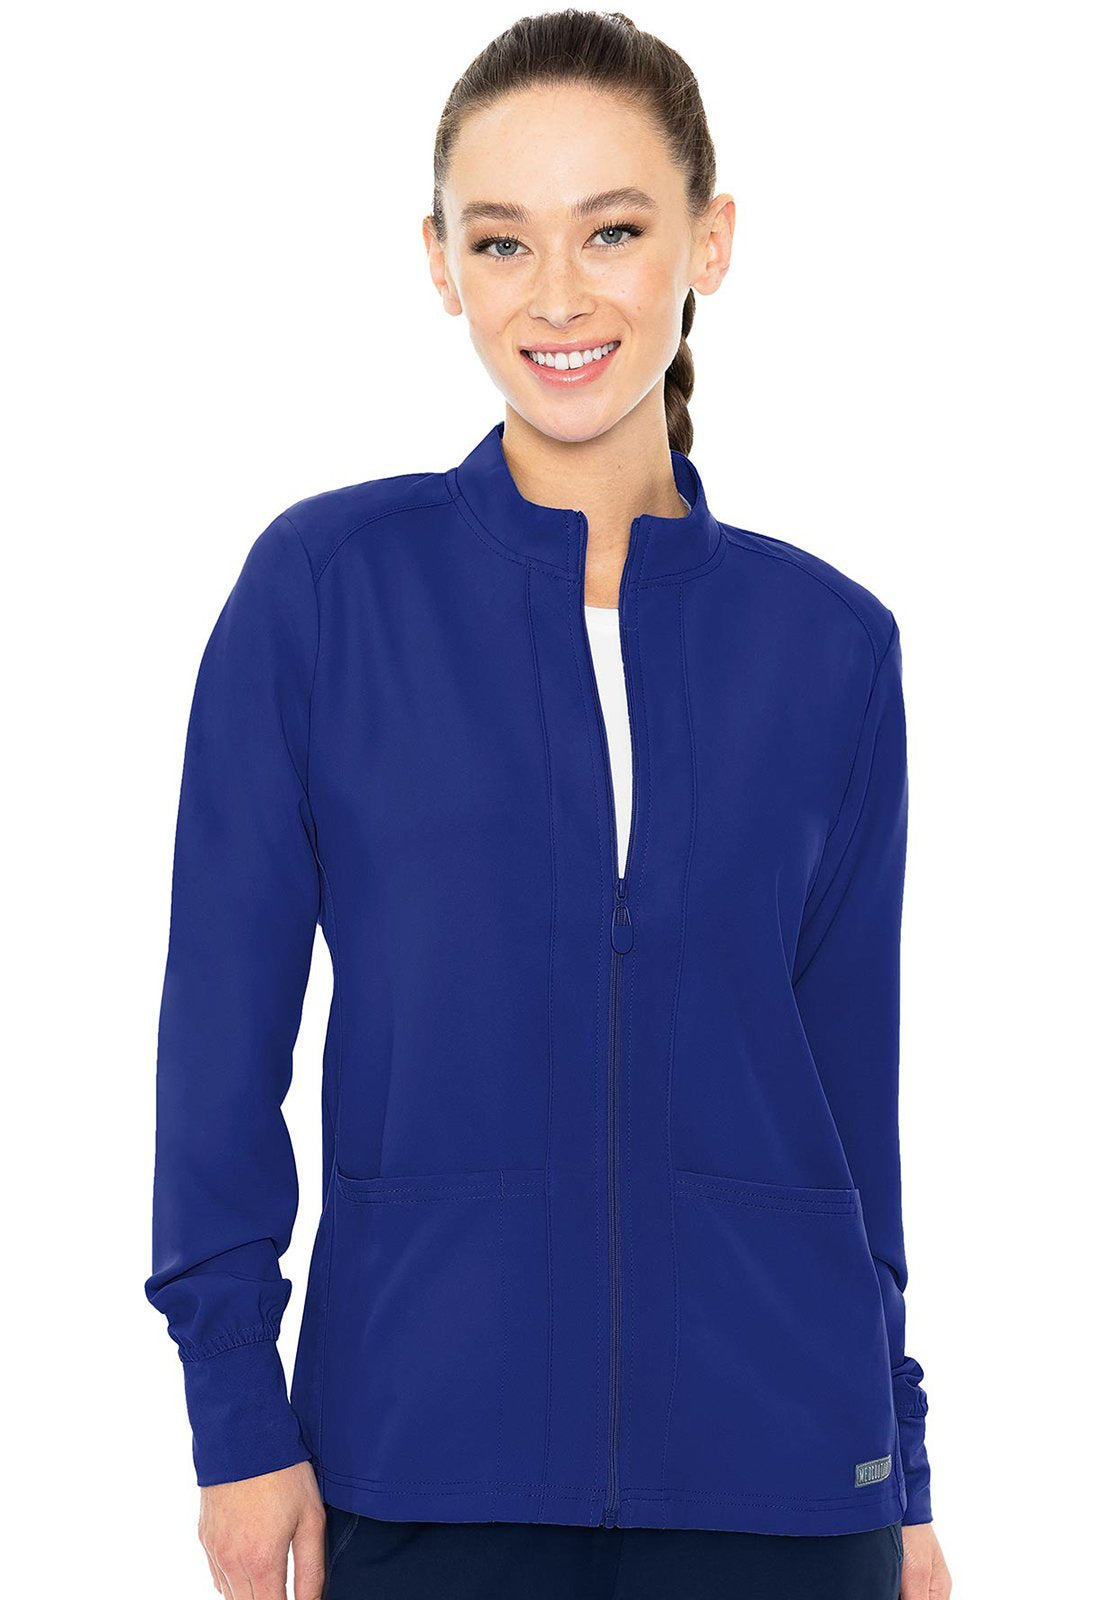 Med Couture MC Insight Galaxy / 3XL MC Insight  Zip Front Warm-Up With Shoulder Yokes MC2660